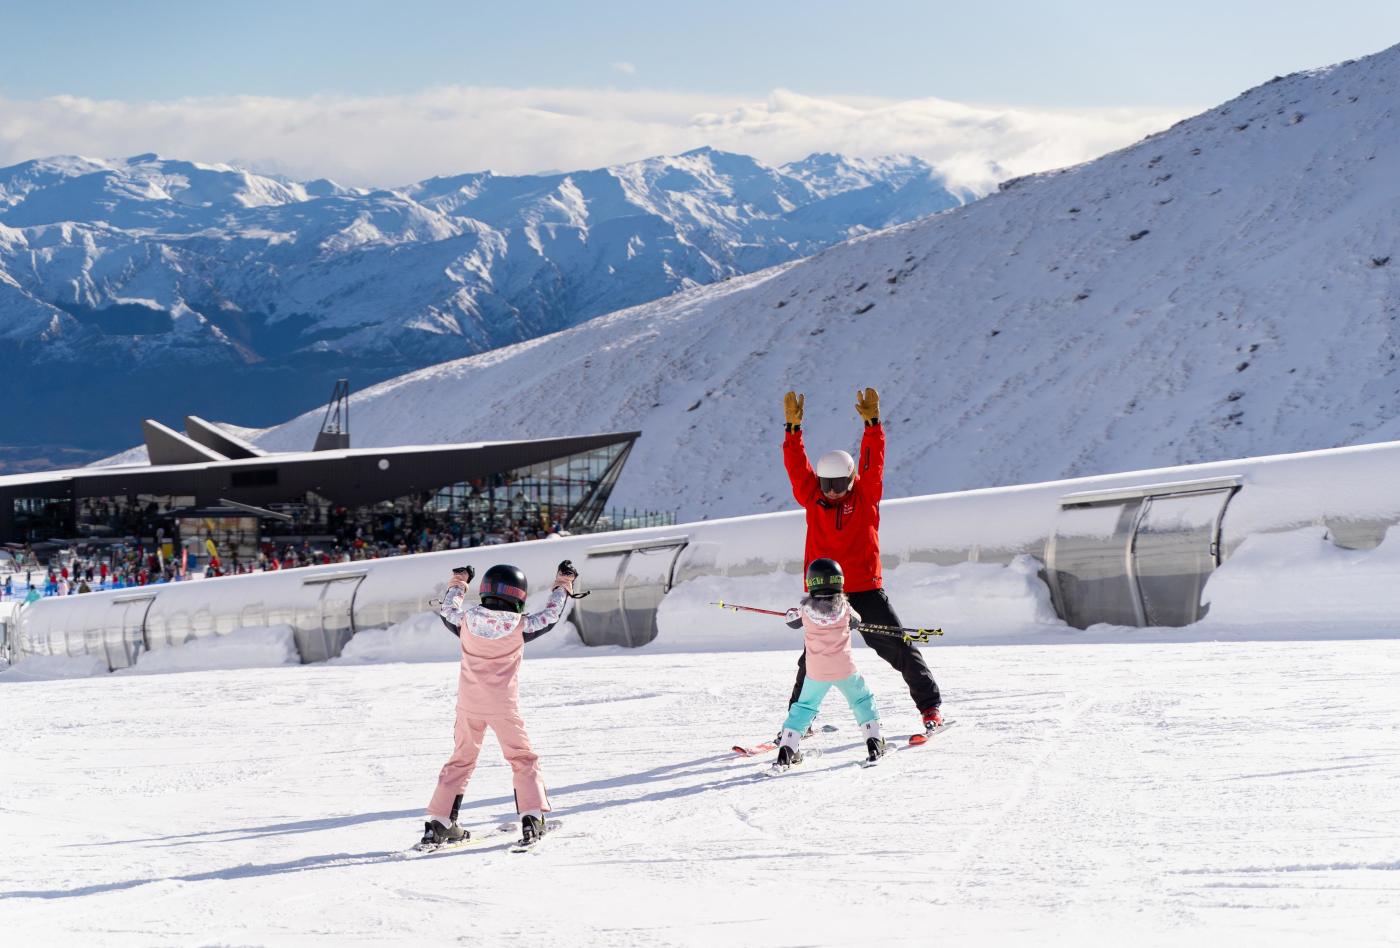 Ski Lessons at The Remarkables